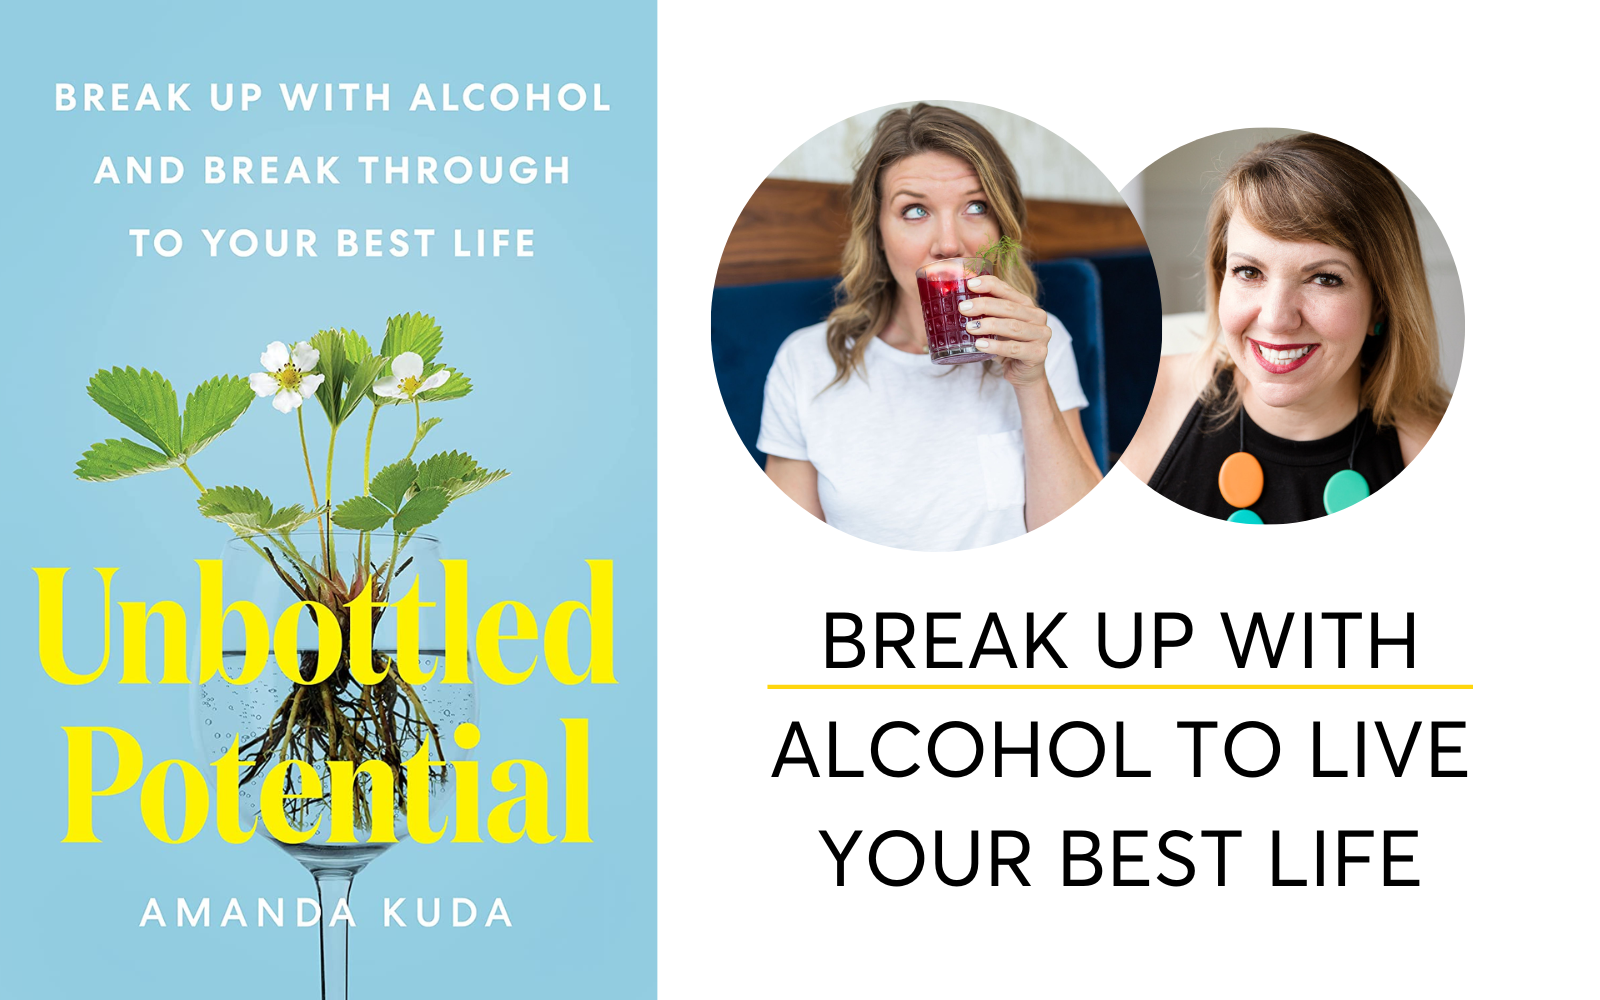 Break Up With Alcohol To Live Your Best Life